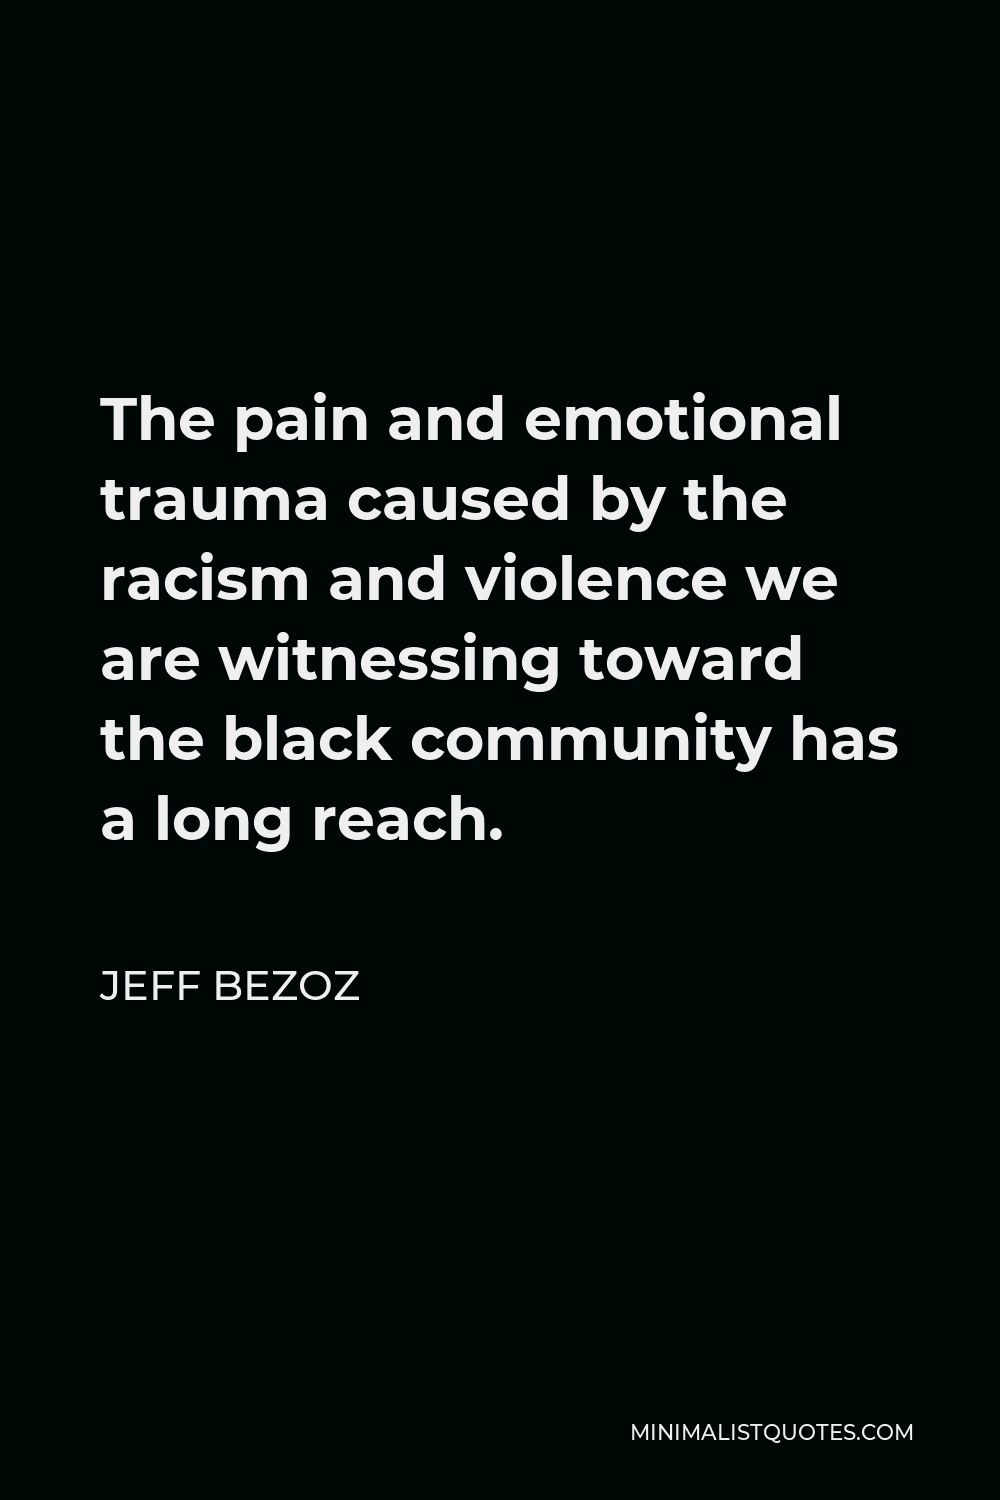 Jeff Bezoz Quote - The pain and emotional trauma caused by the racism and violence we are witnessing toward the black community has a long reach.